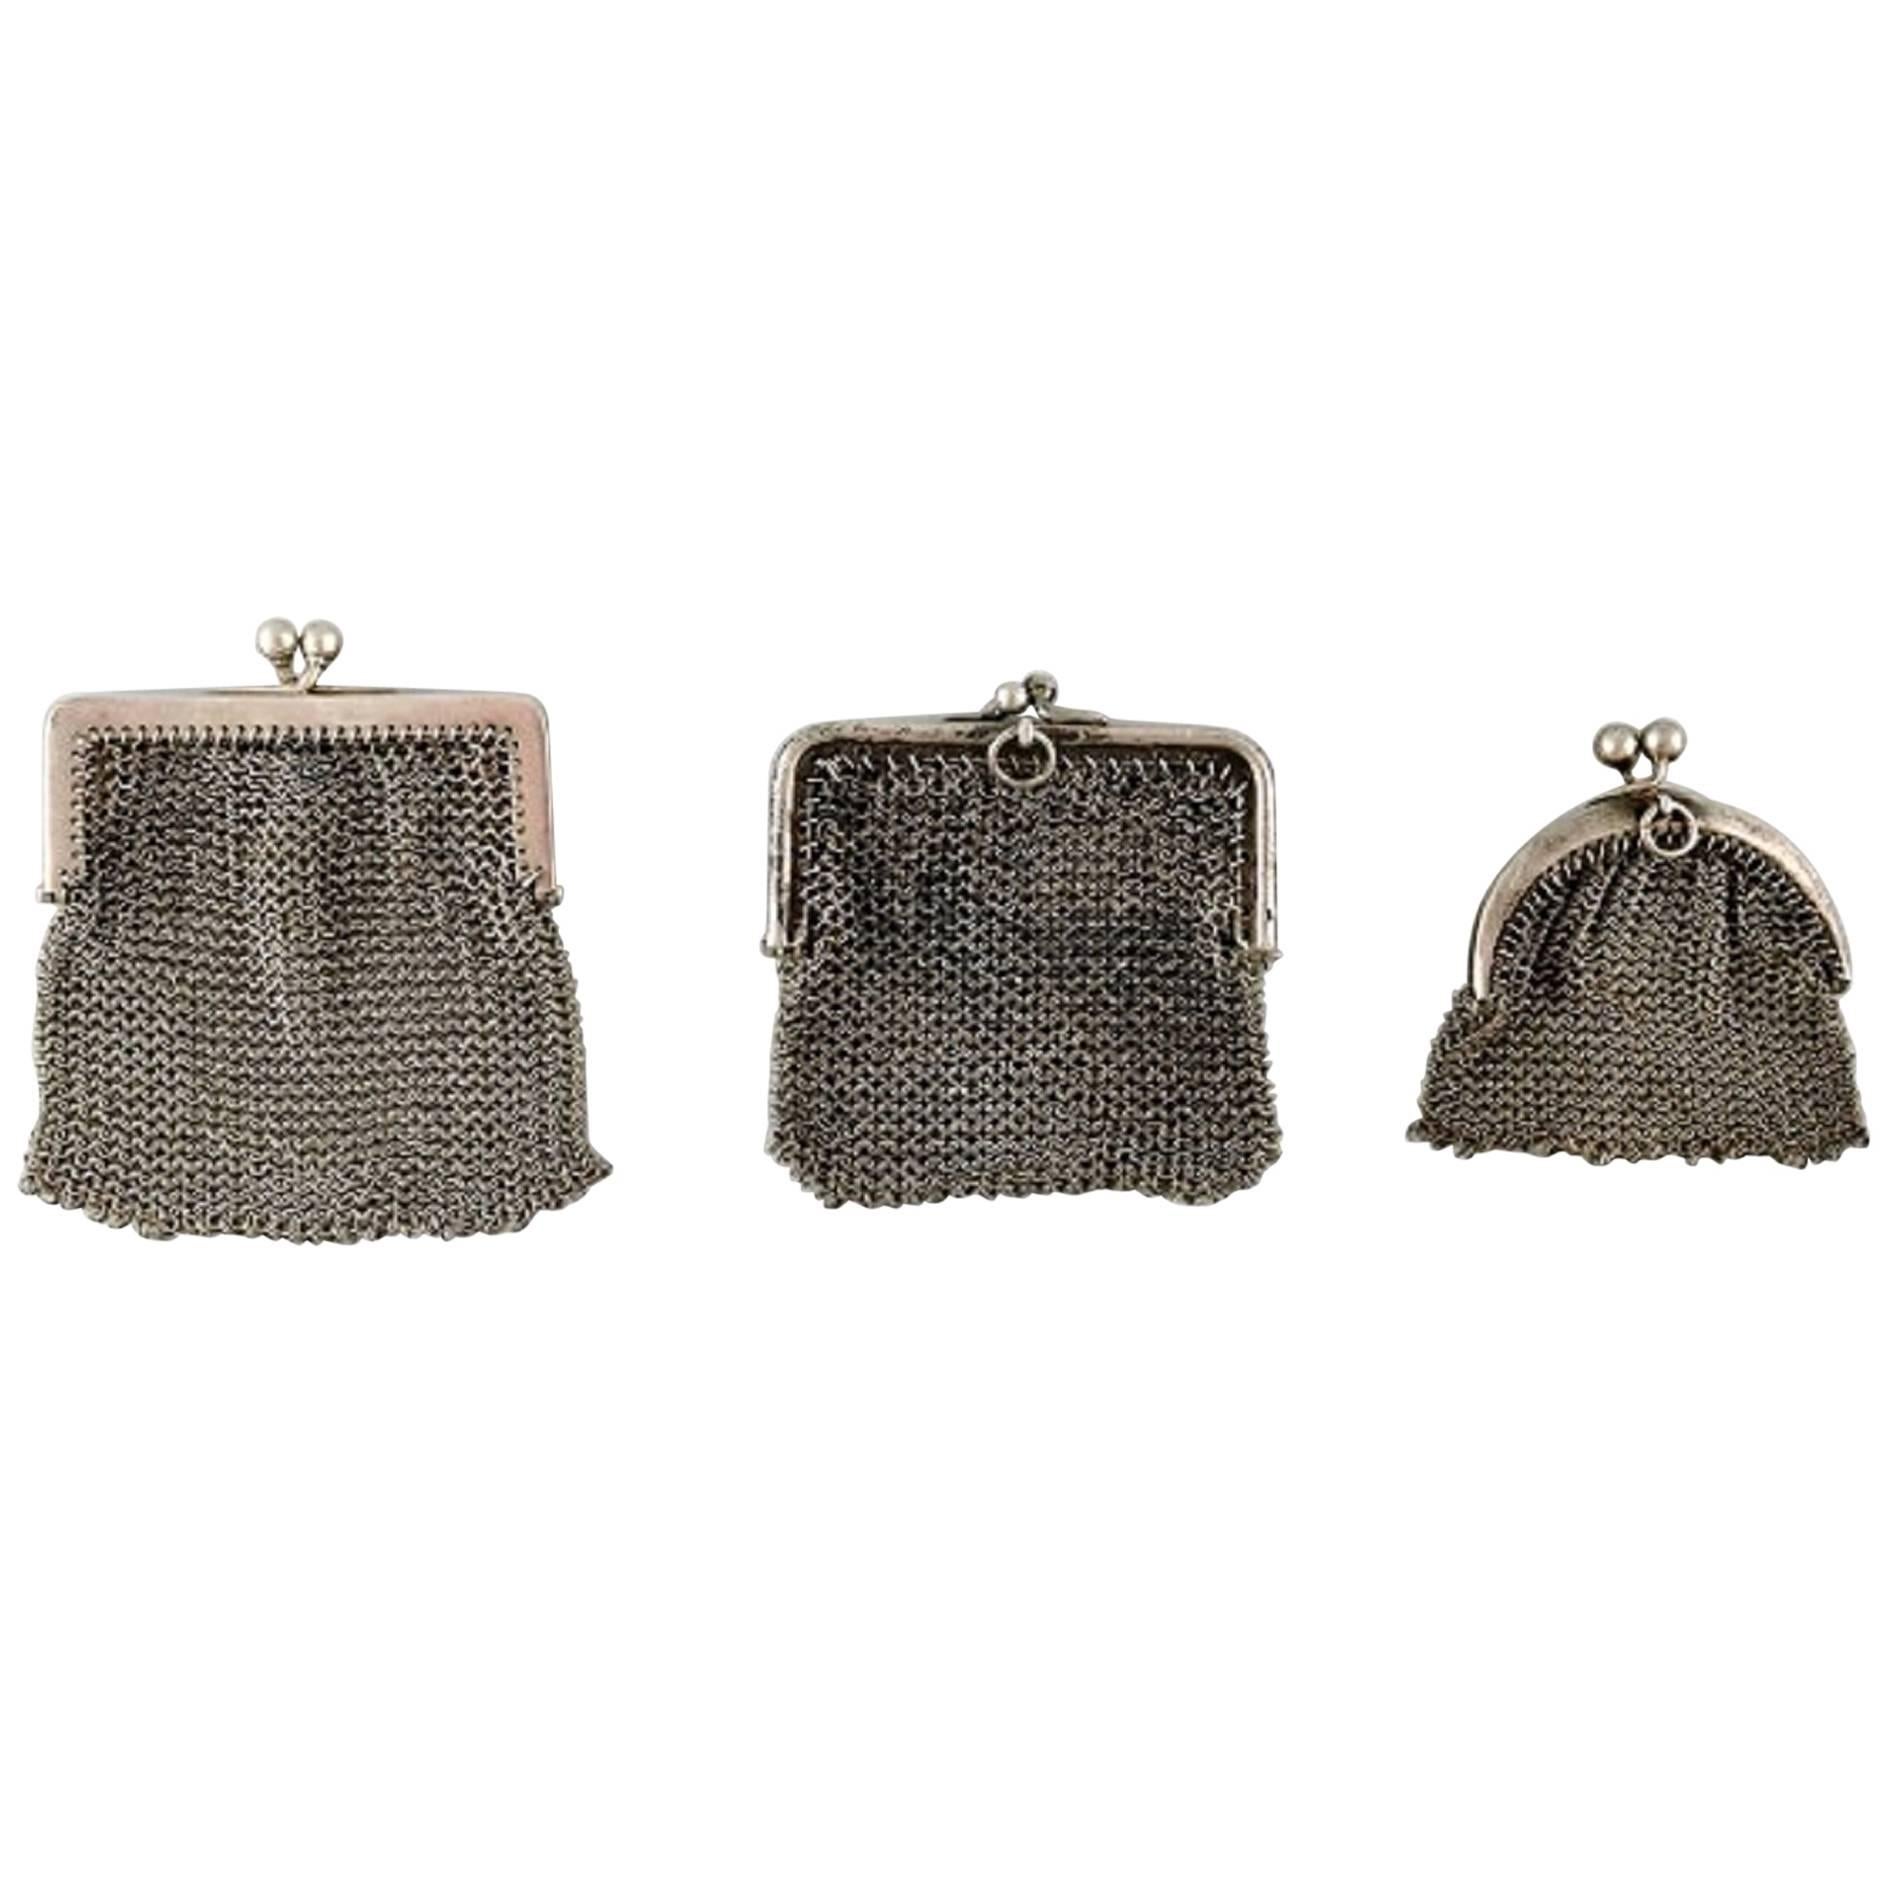 Three Small Ladies Silver Purses, circa 1900, Knitted Bag For Sale